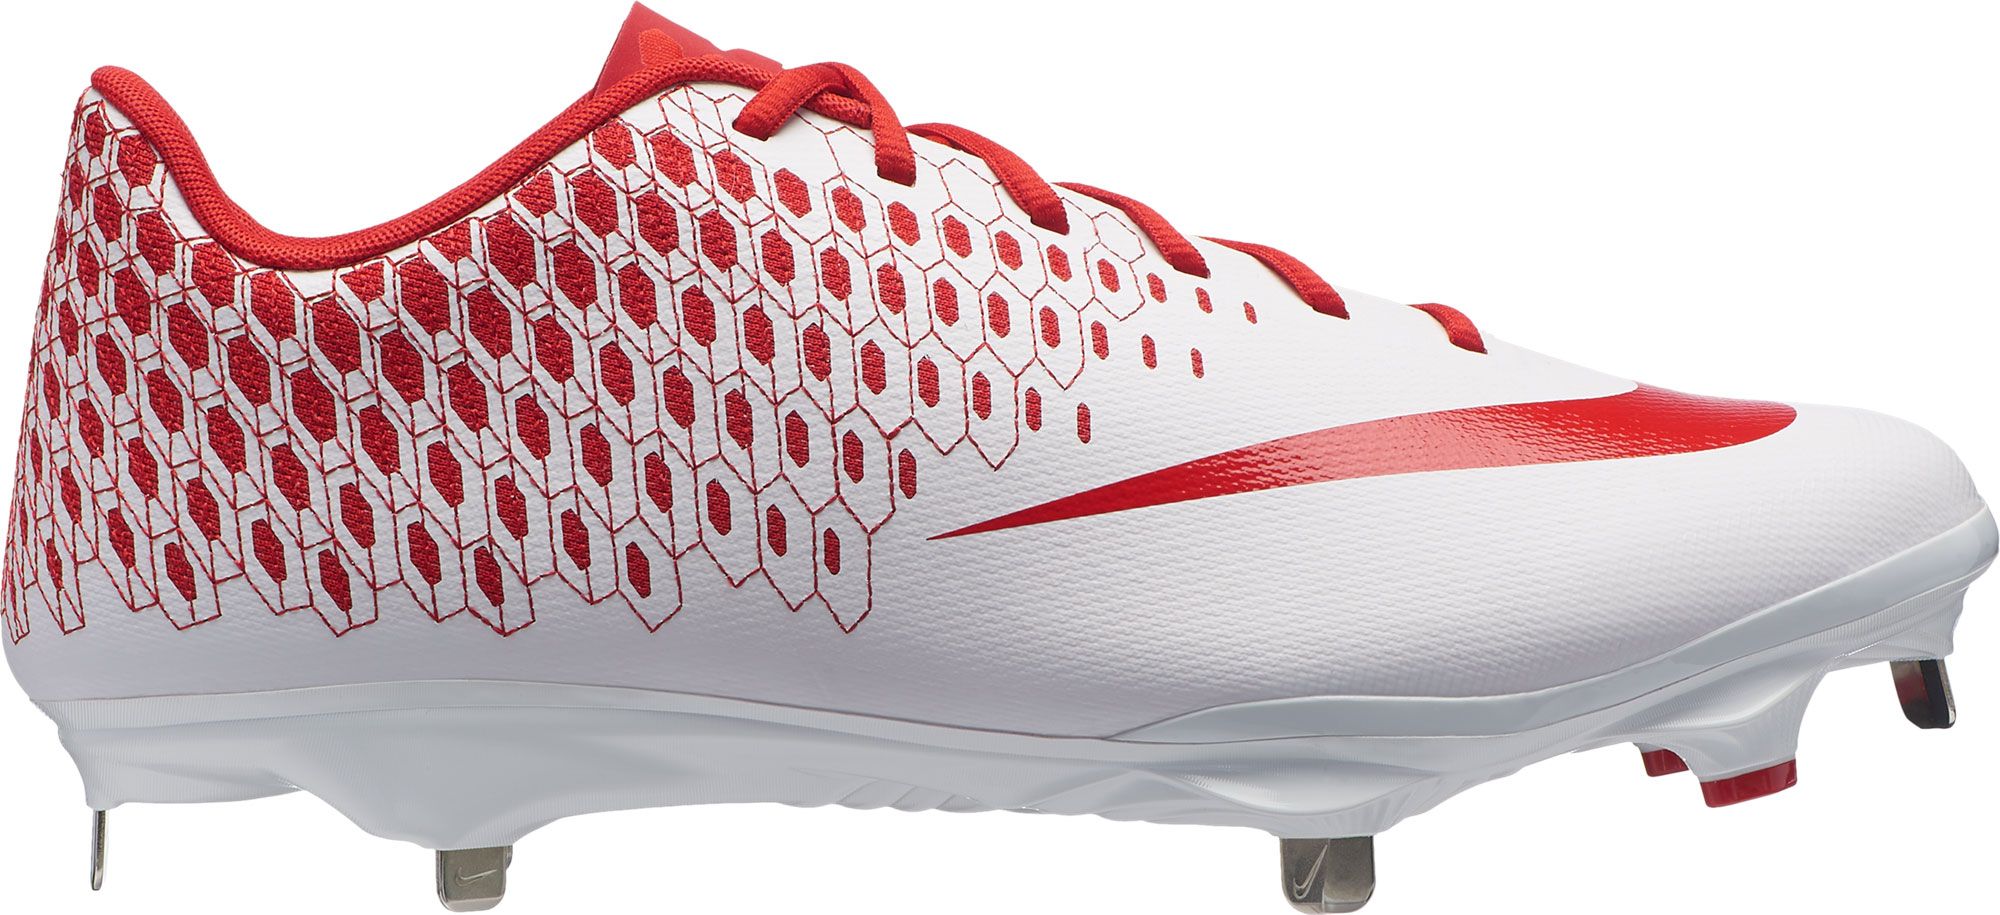 red and white nike baseball cleats